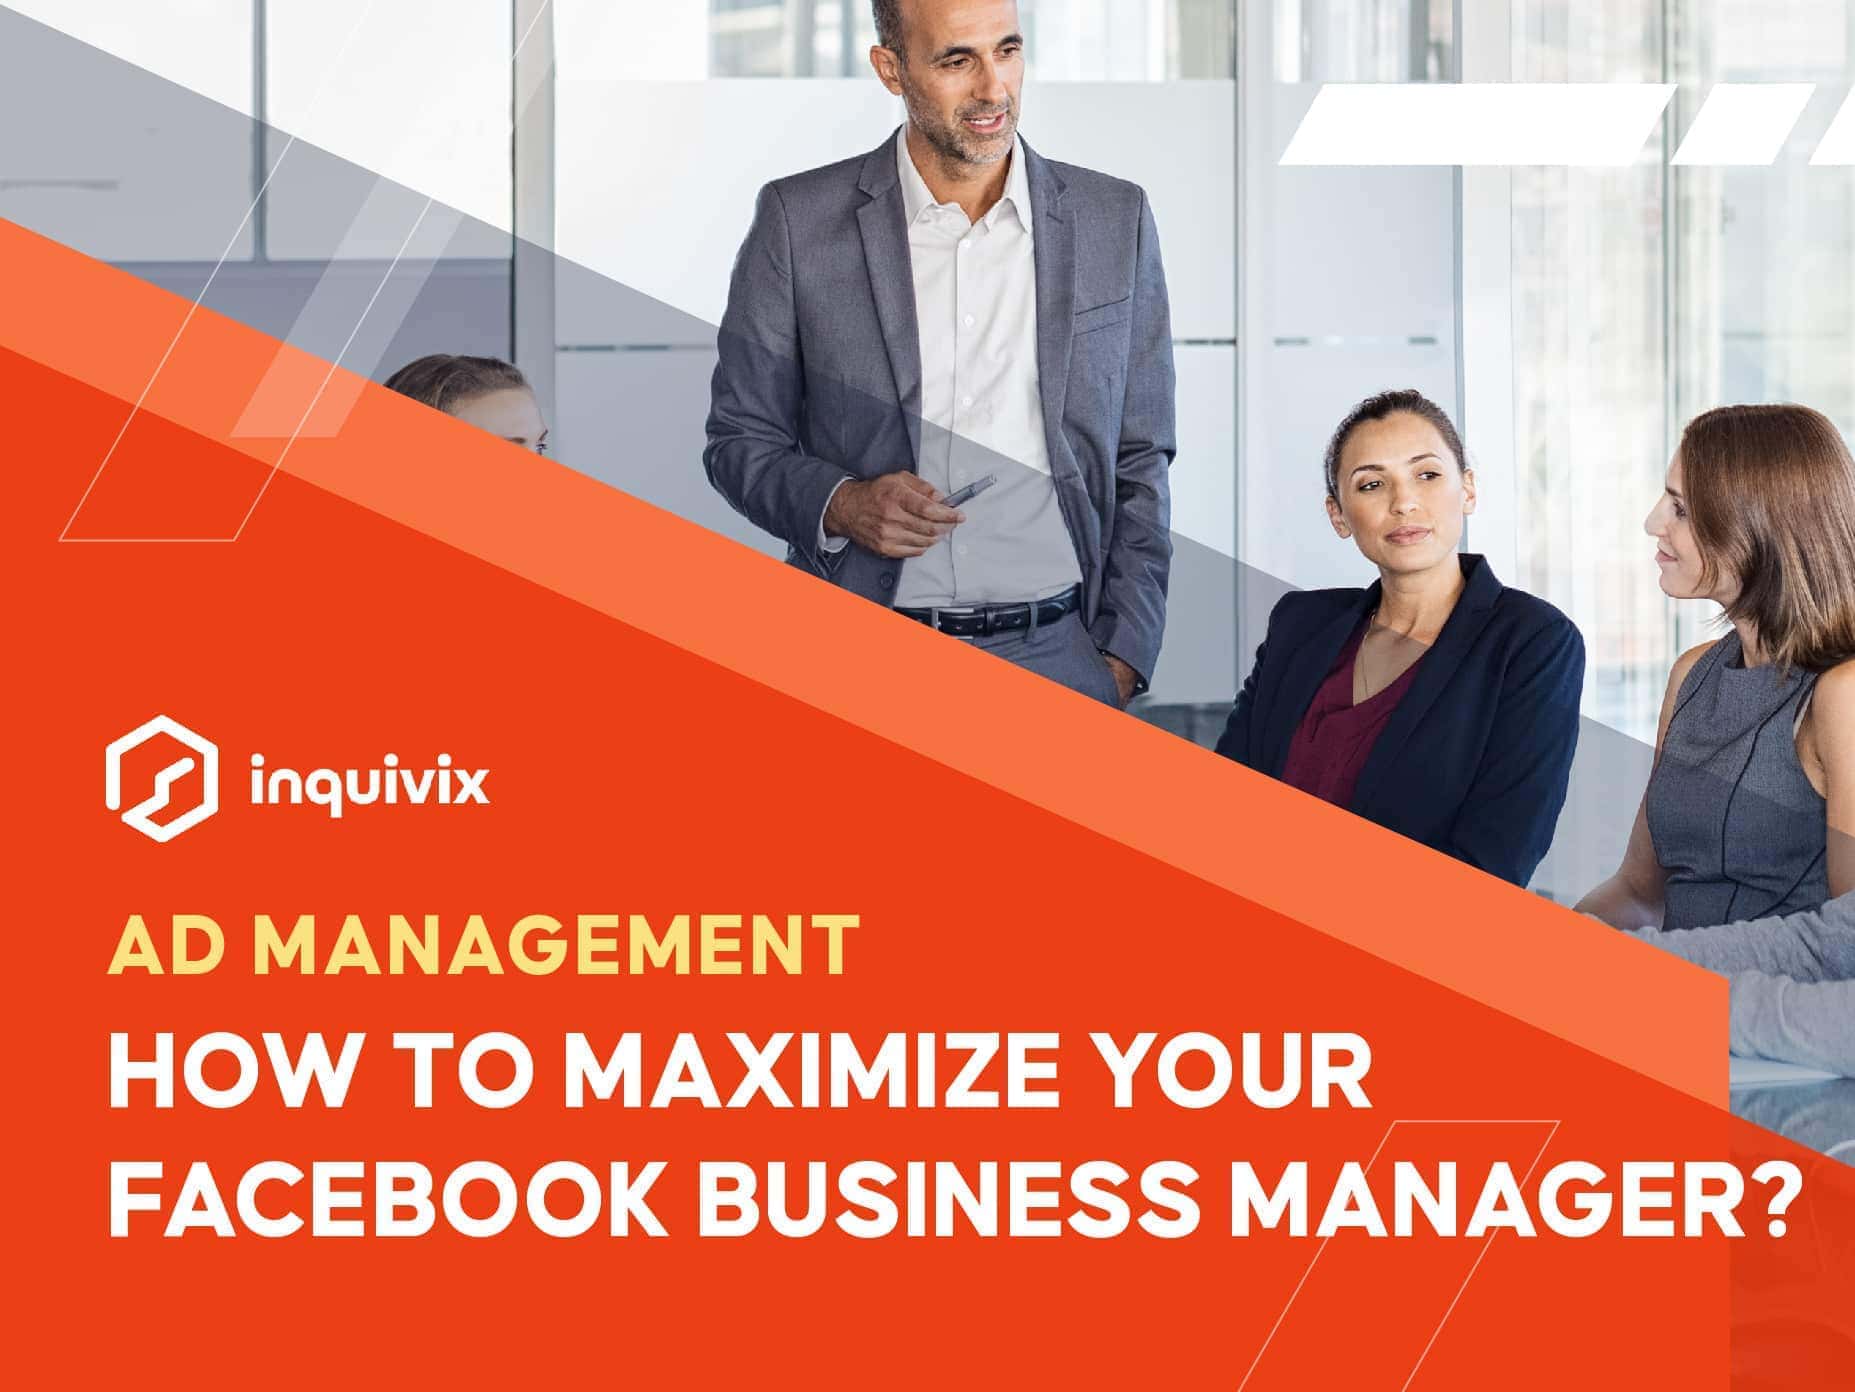 HOW TO MAXIMIZE YOUR FACEBOOK BUSINESS MANAGER